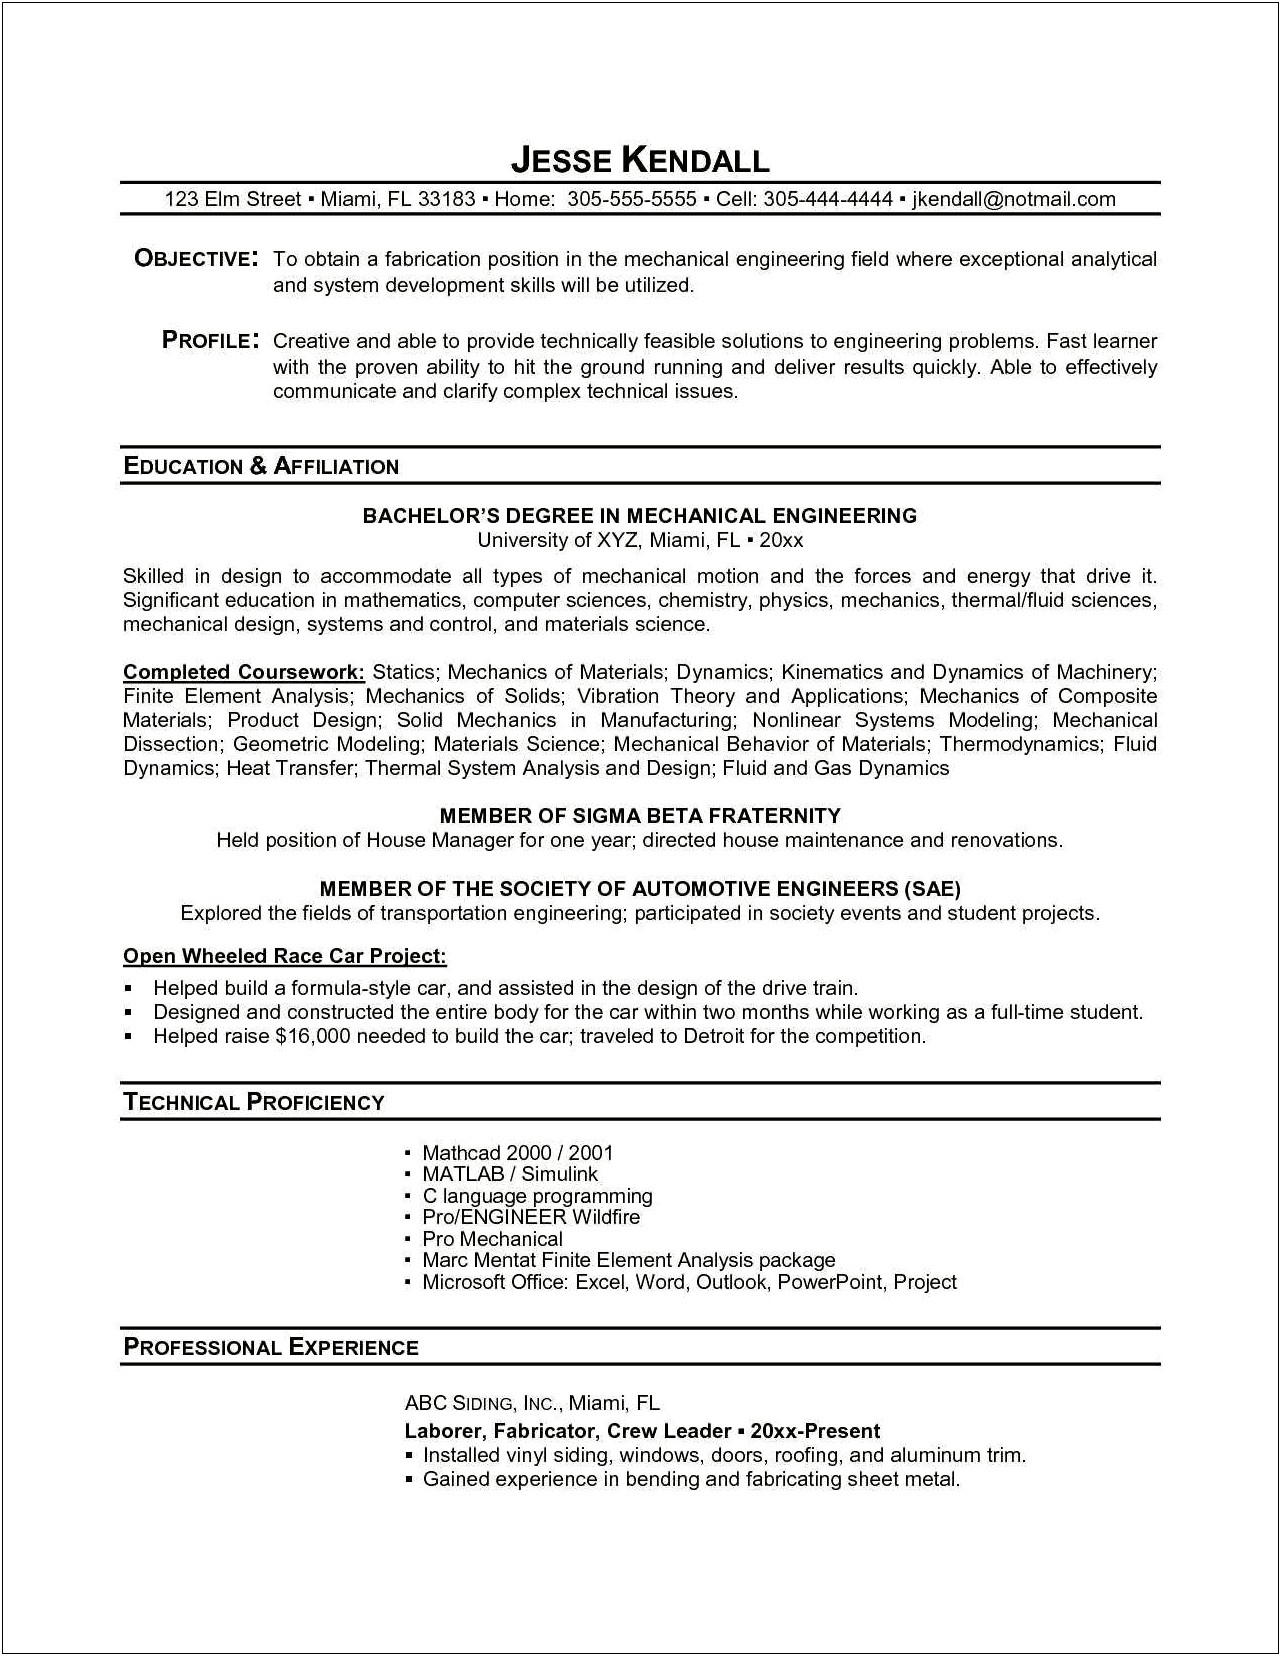 Resume Completing Degree While Working Full Time